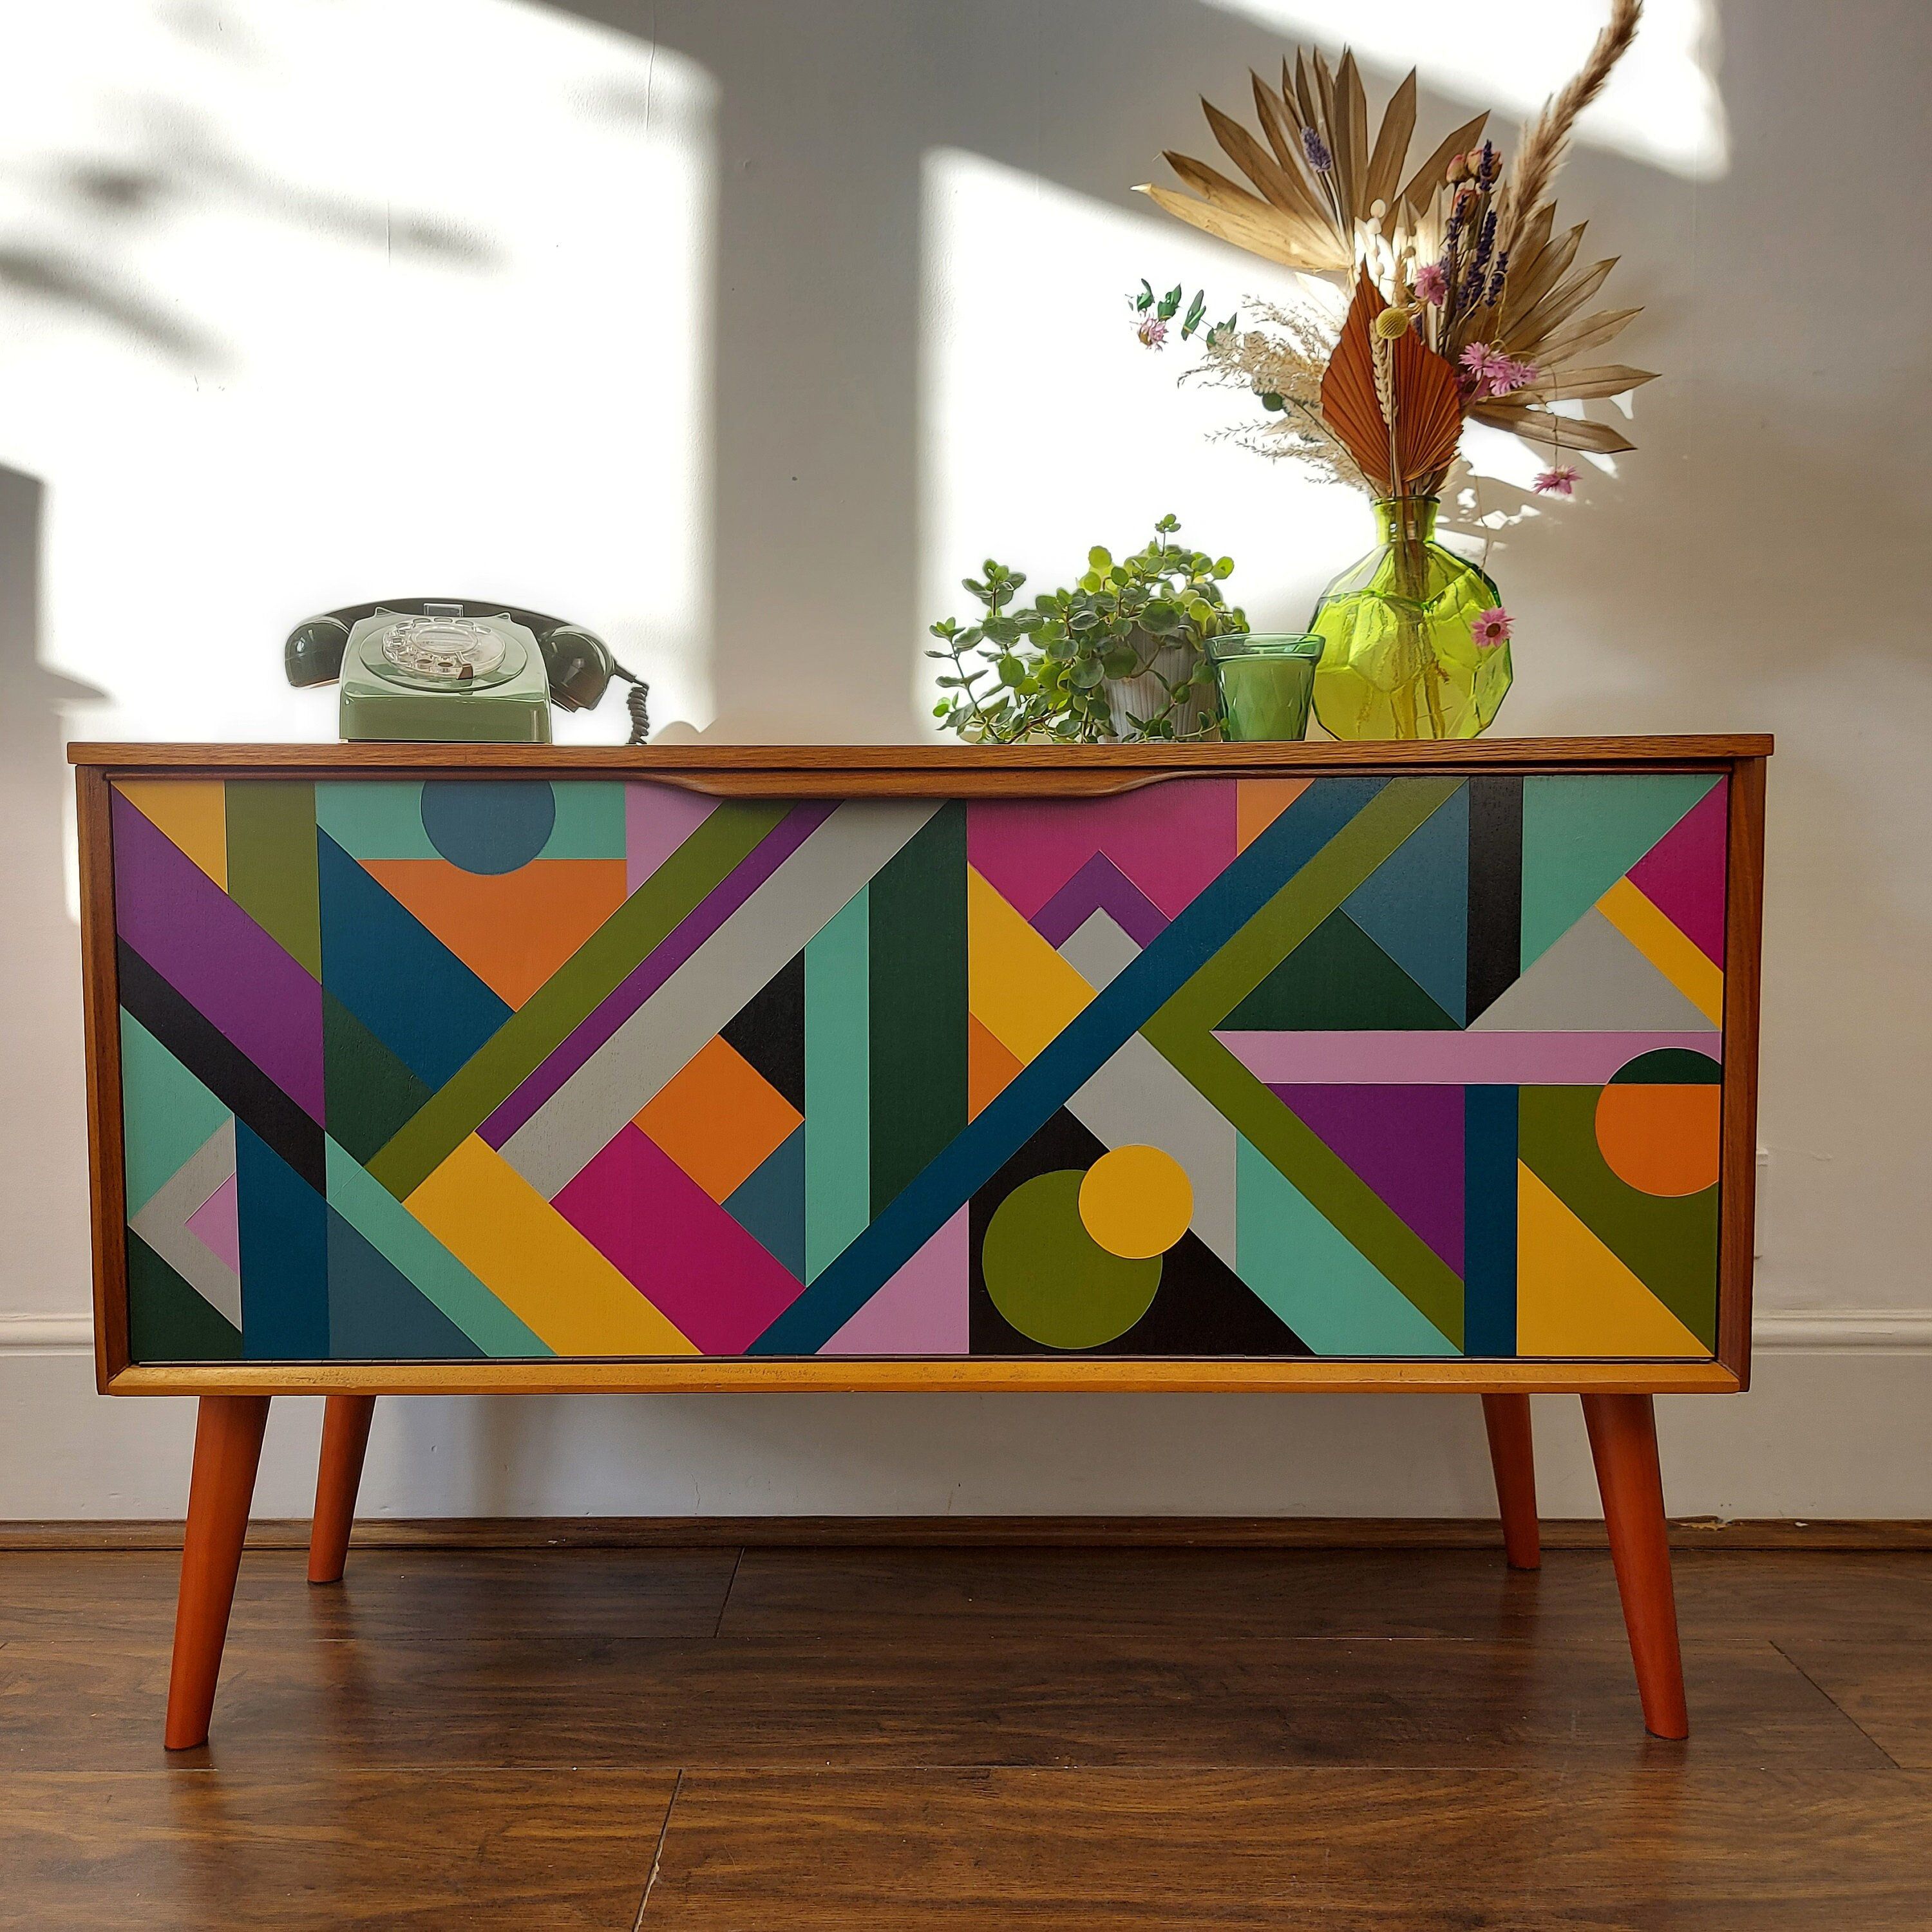 Sold Geometric Sideboard Hand Painted Credenza Up Cycled – Etsy Inside Most Recently Released Geometric Sideboards (View 10 of 15)